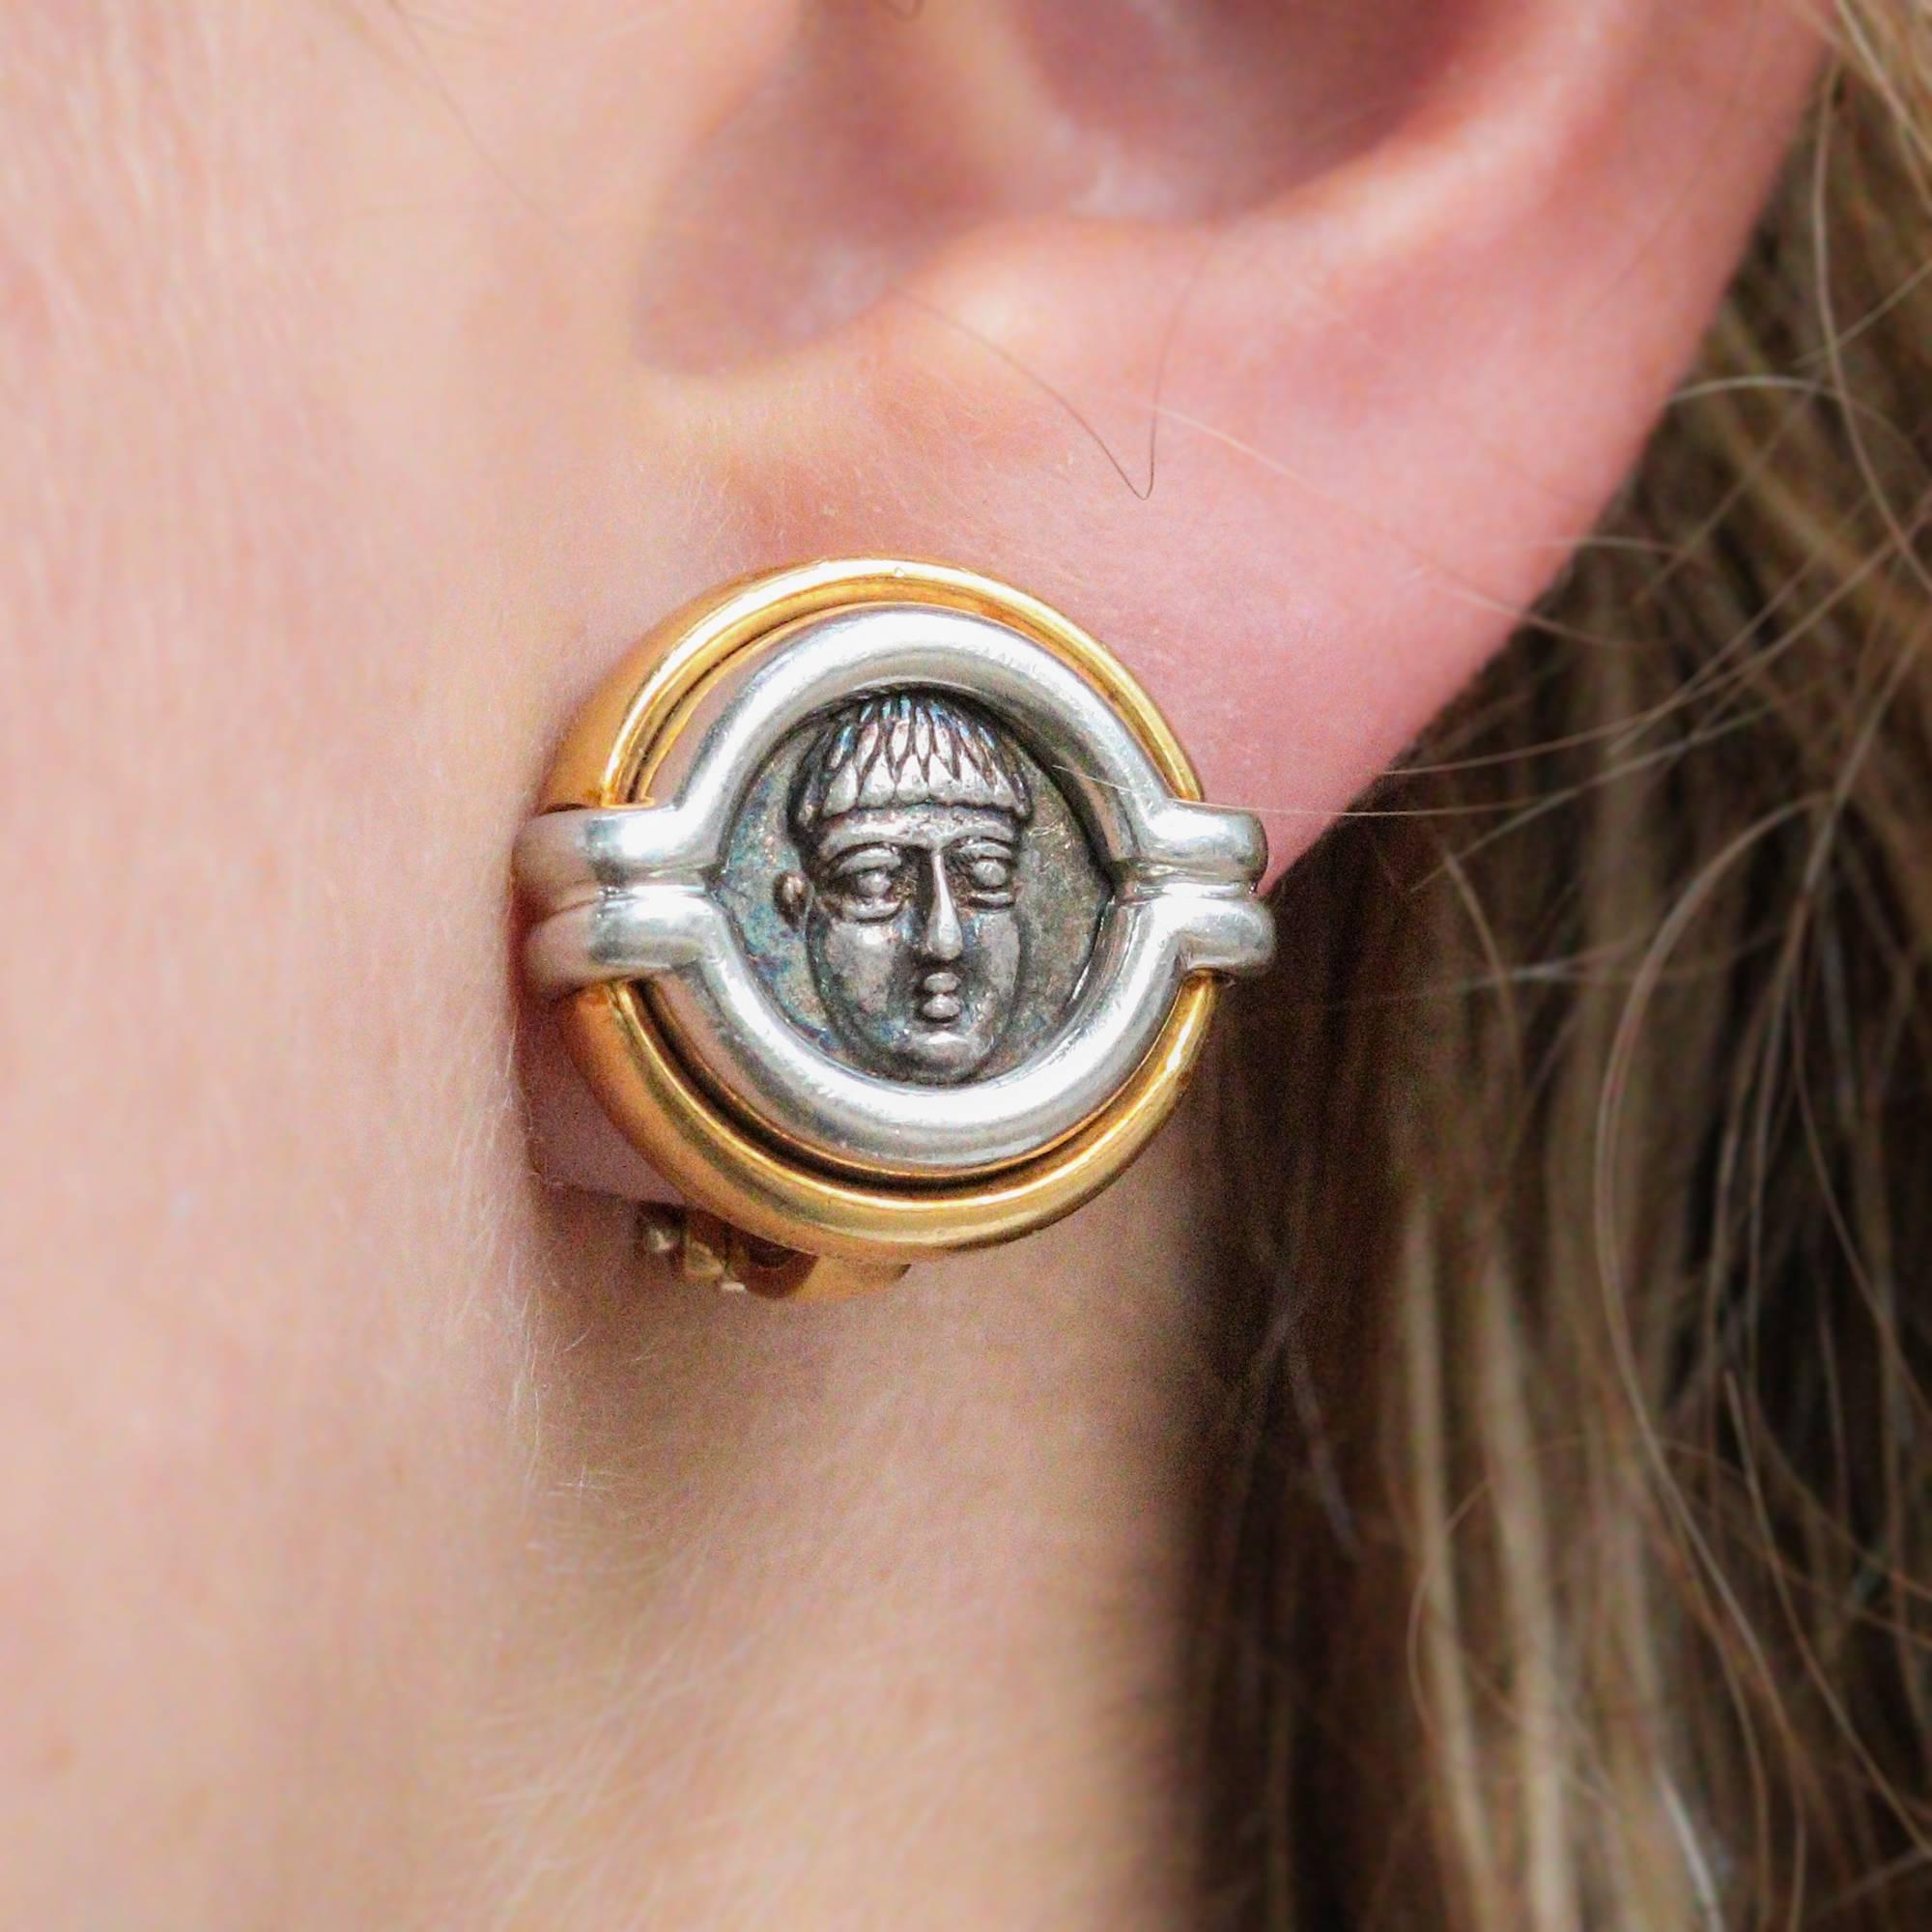 These beautiful earrings feature 2 authentic ancient silver coins dating to the 4th Century BC to the area of Campania, Phistelia, in modern day Italy. The earrings feature a 2 tone casing design with 18k white and yellow gold and a pierced back